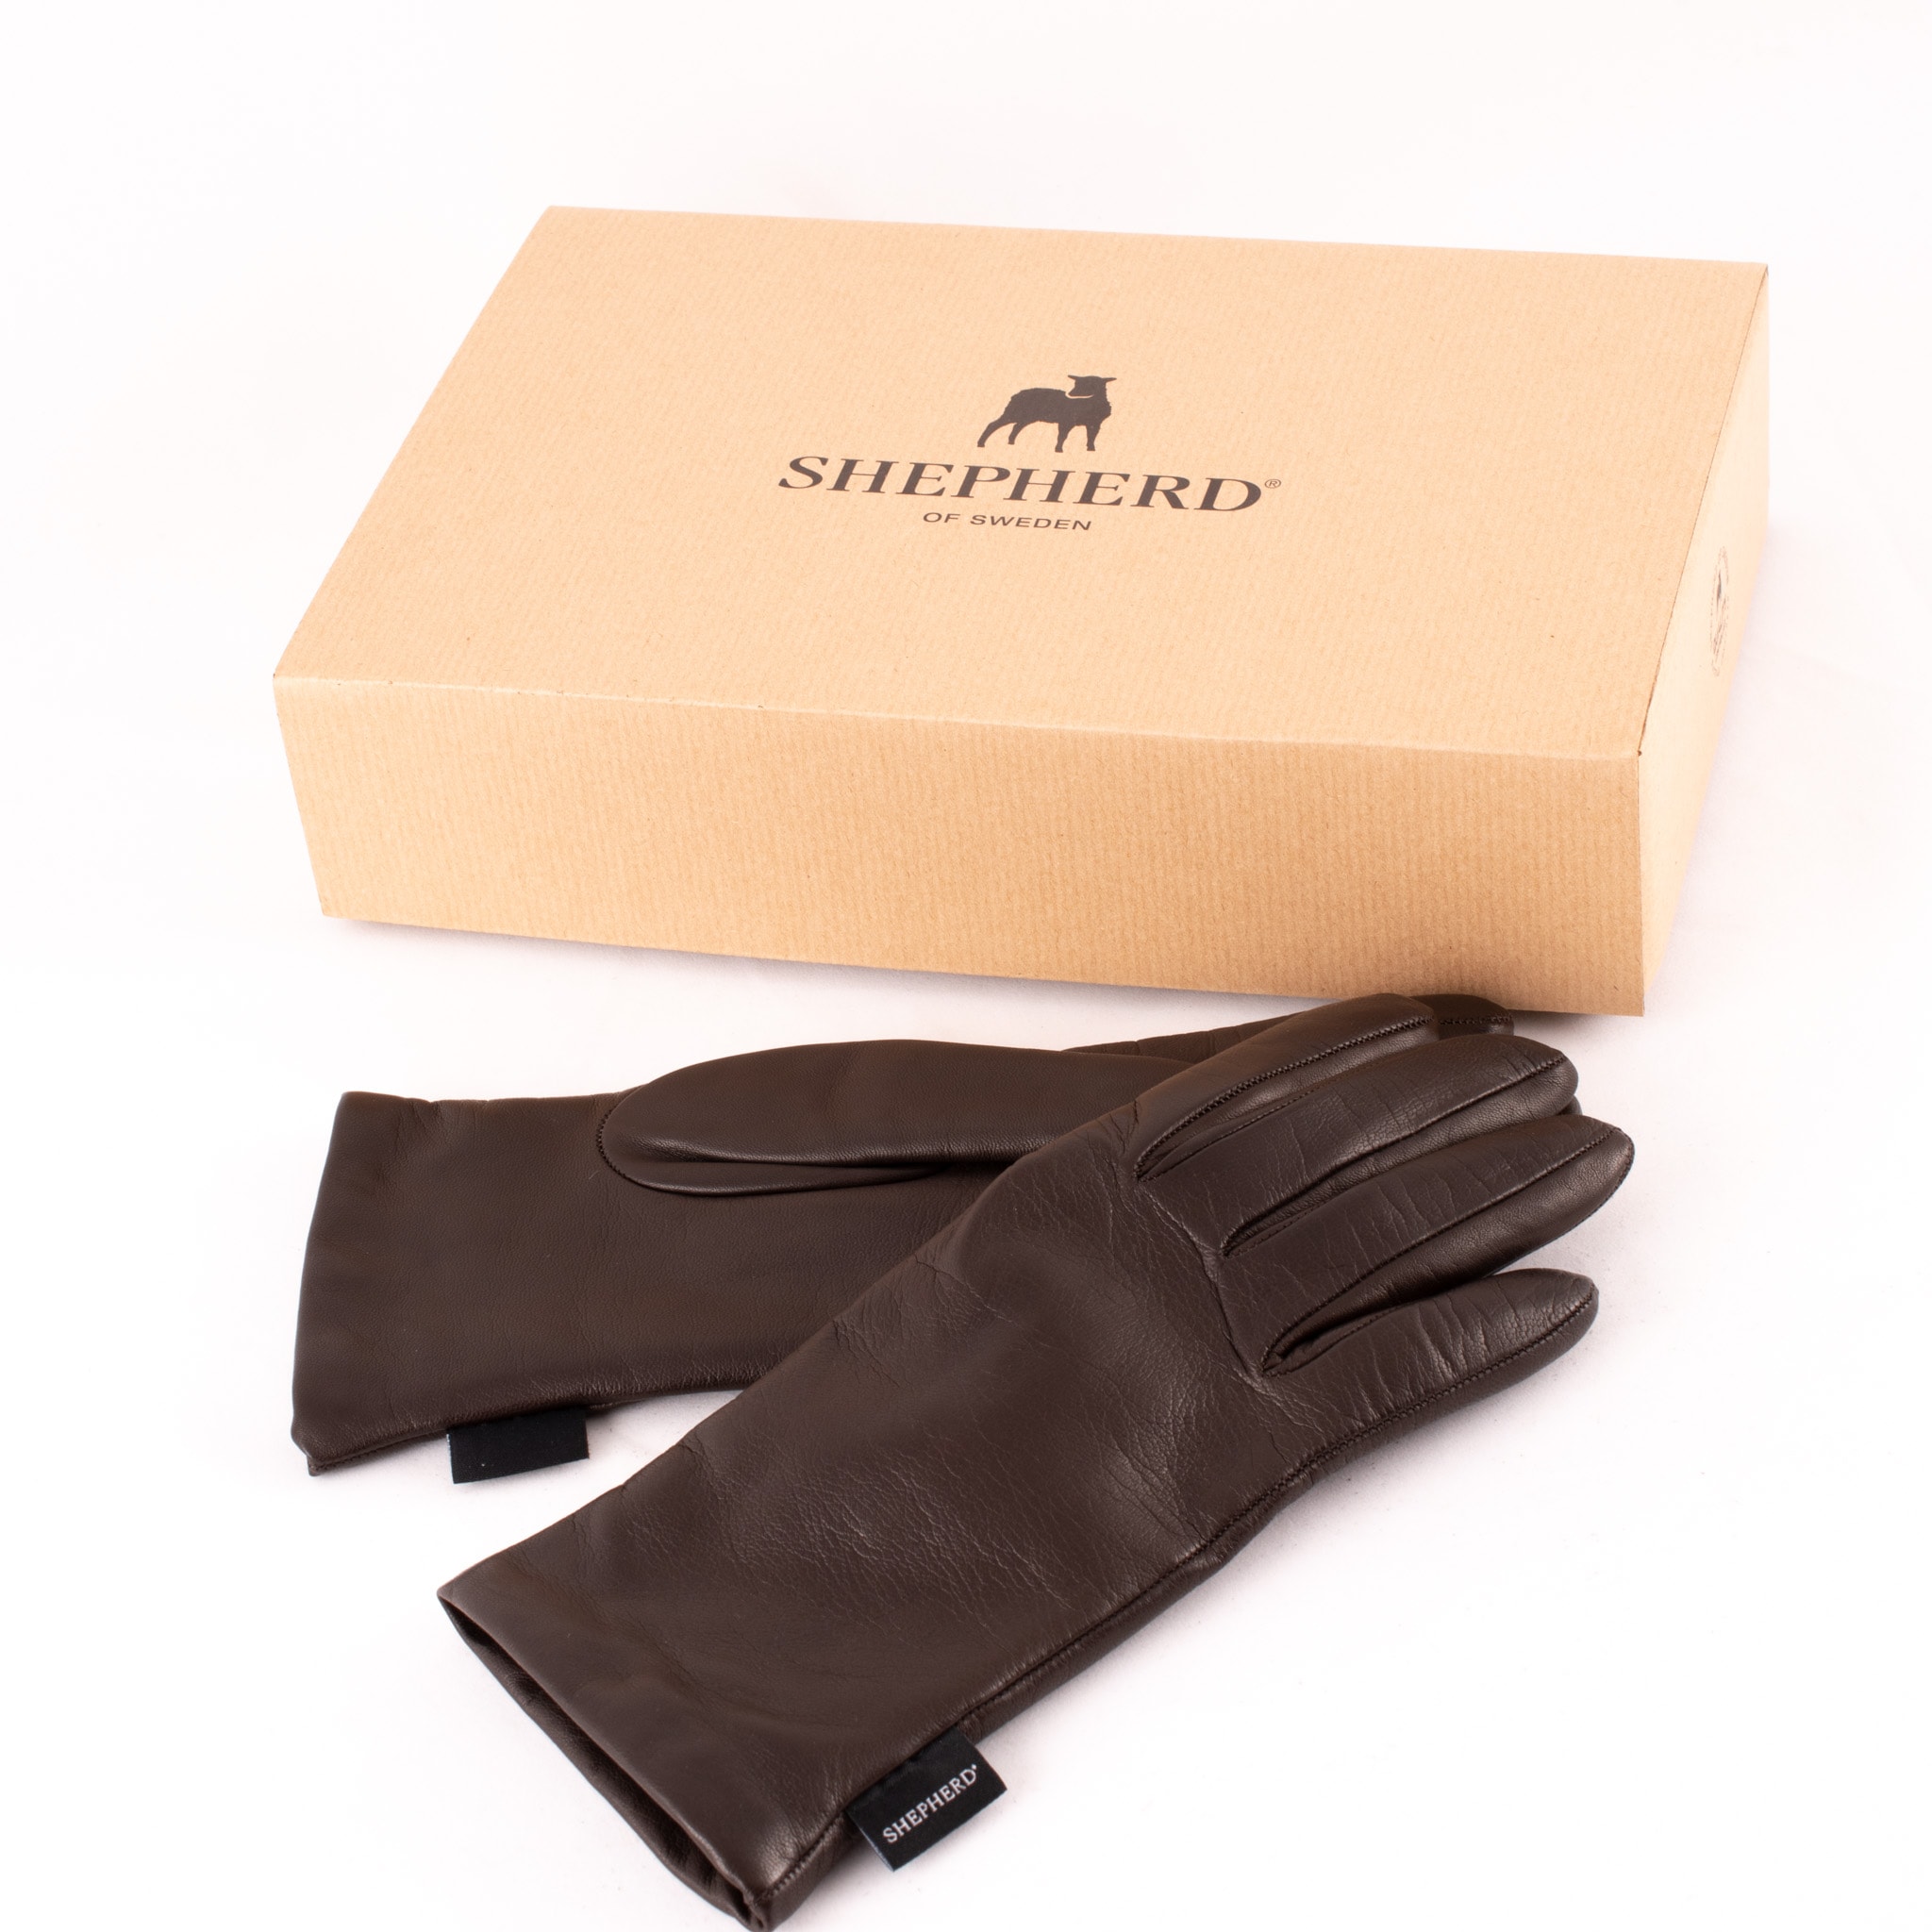 Shepherd leather glove lined with wool